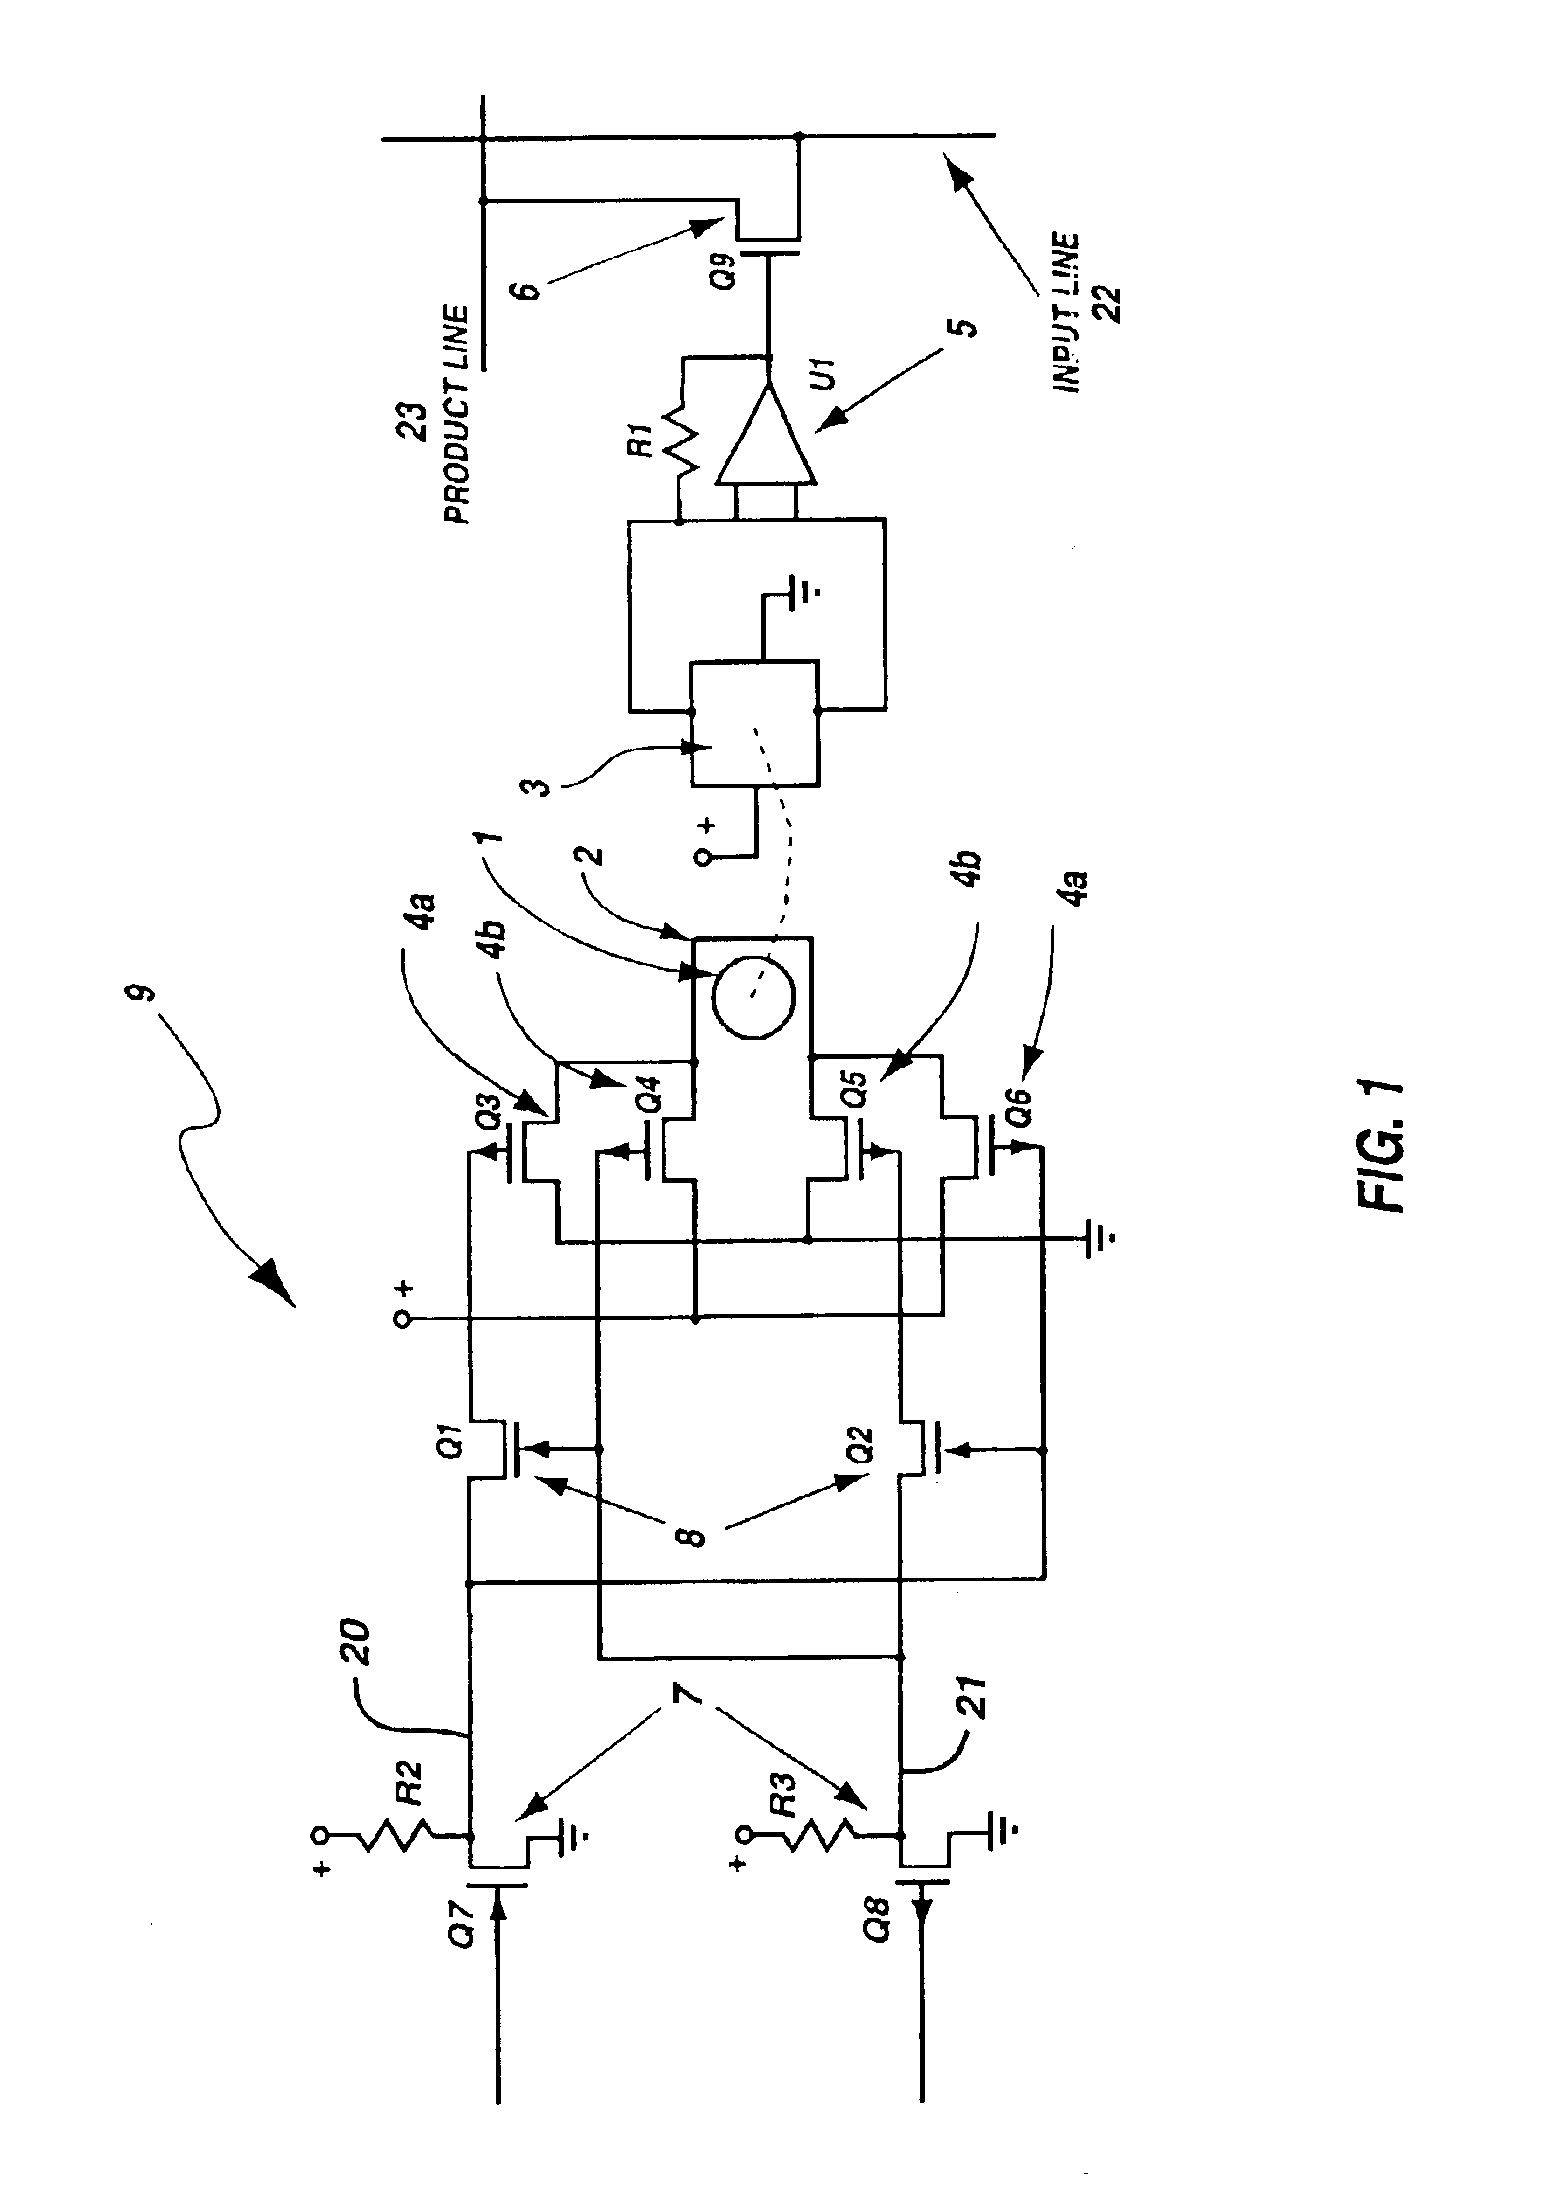 Programmable array logic circuit whose product and input line junctions employ single bit non-volatile ferromagnetic cells